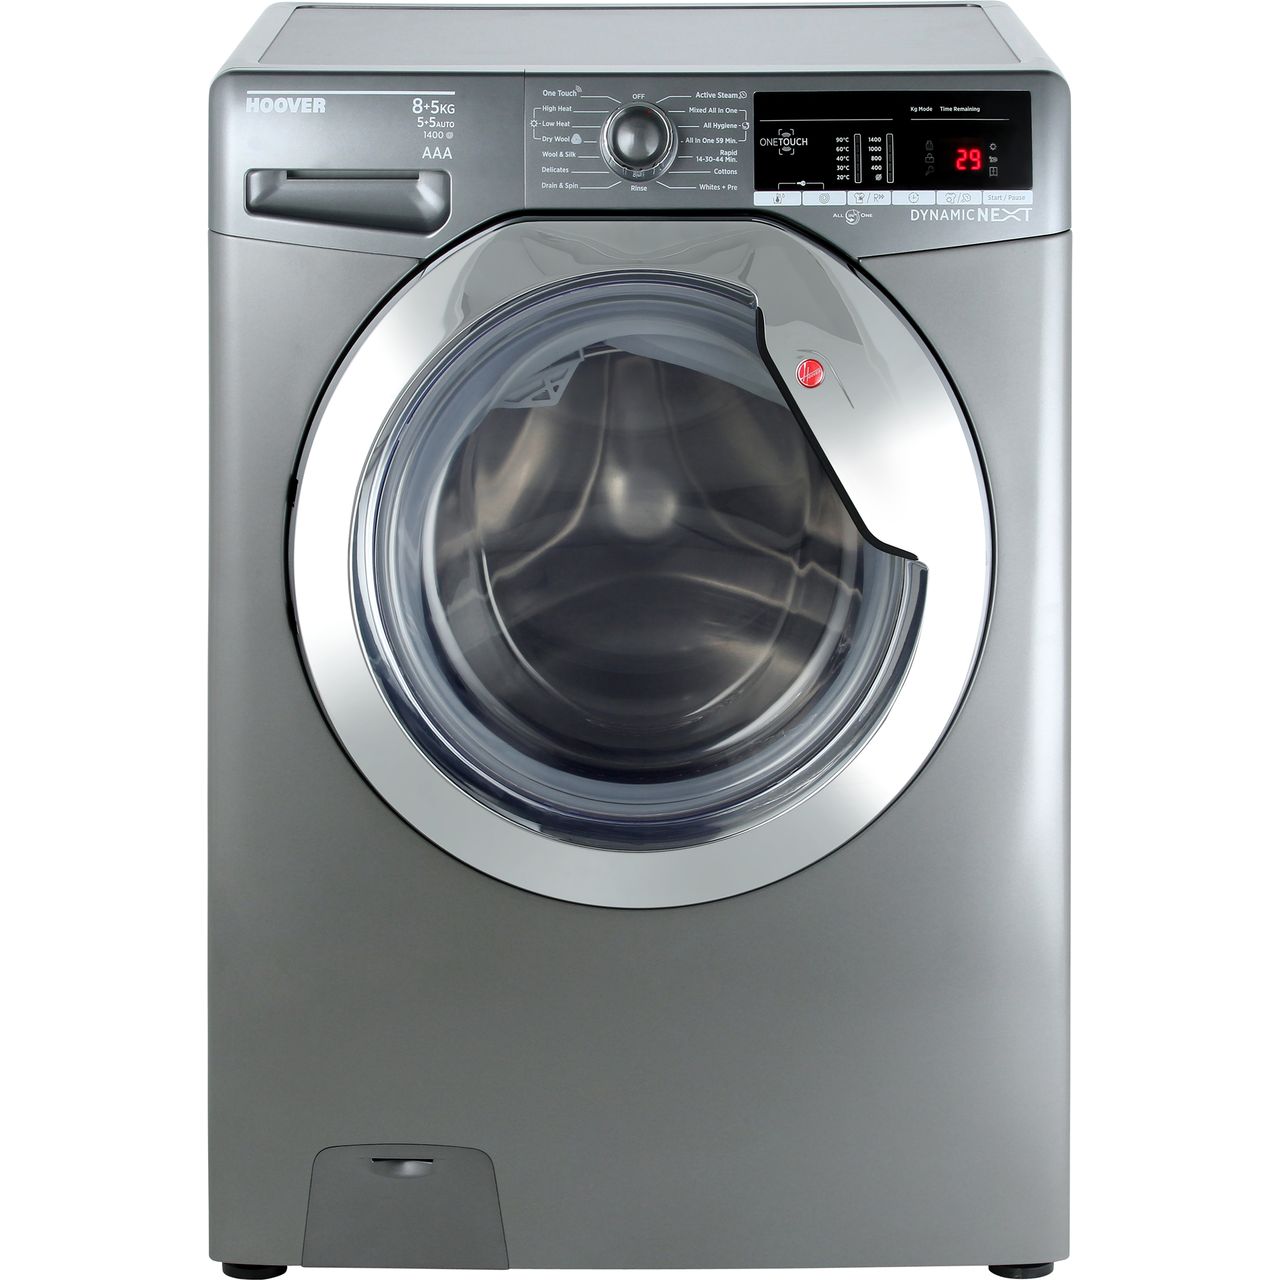 Hoover Dynamic Next Advance WDXOA485ACR 8Kg / 5Kg Washer Dryer with 1400 rpm Review